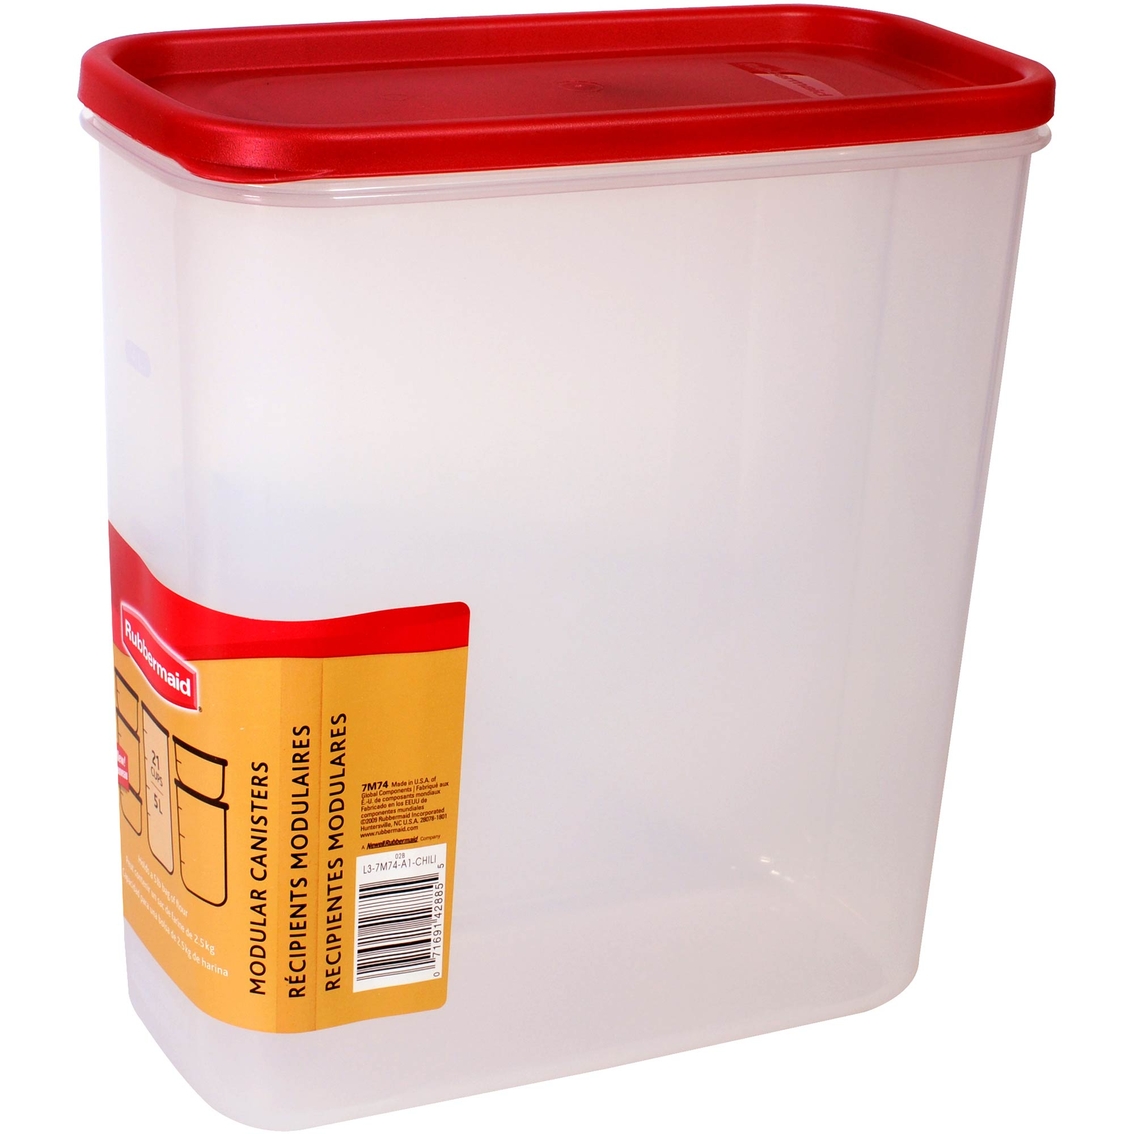  Rubbermaid 5 Cup Dry Food Storage - Clear Base, Red